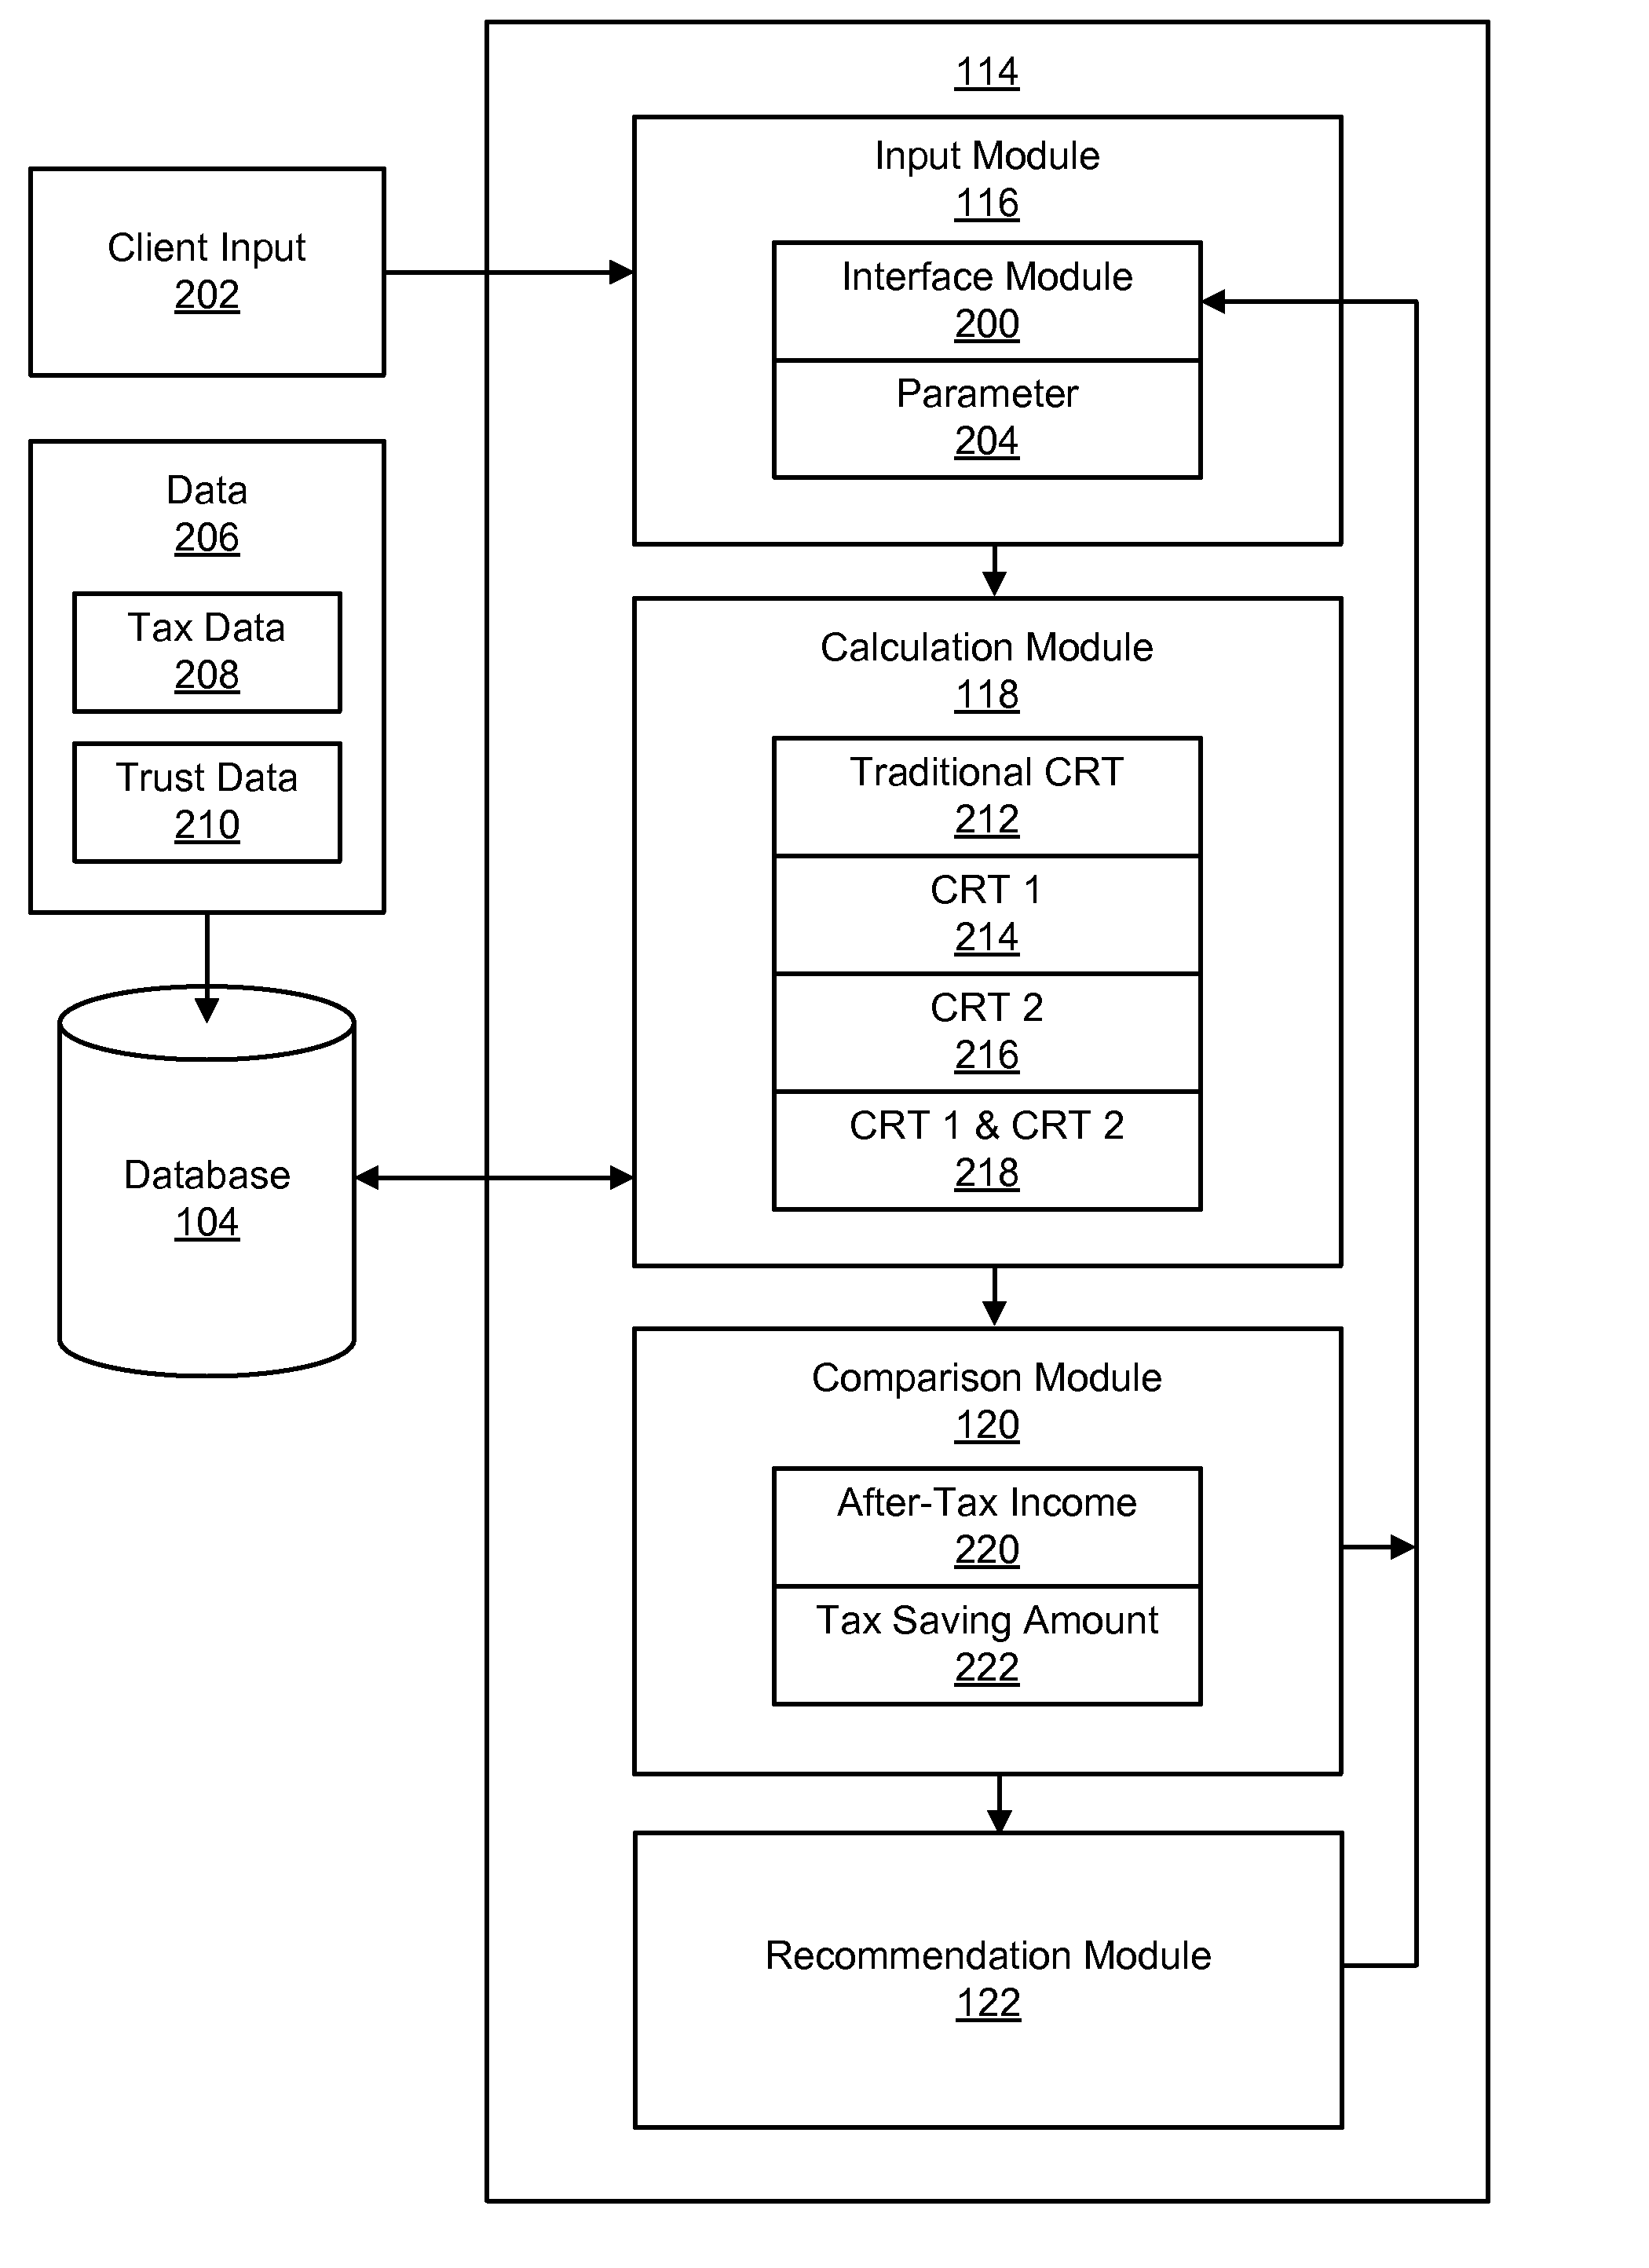 Apparatus, system, and method for determining and achieving a tax advantage through the specialized management of a plurality of charitable remainder trusts